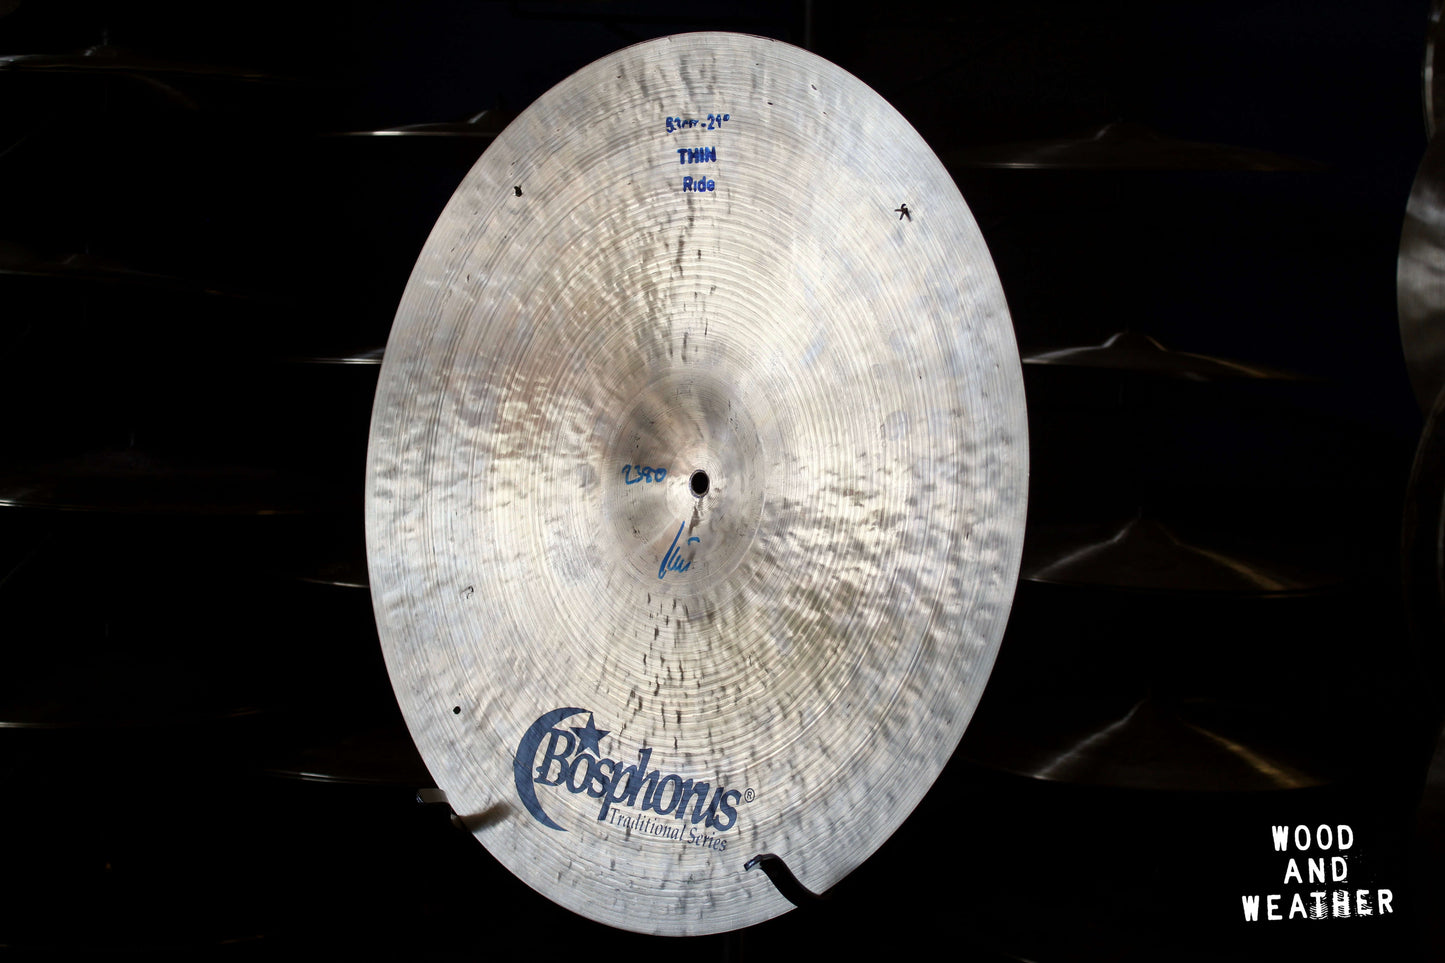 Used Bosphorus 21" Traditional Series Thin Ride Cymbal w/ Rivets 2380g